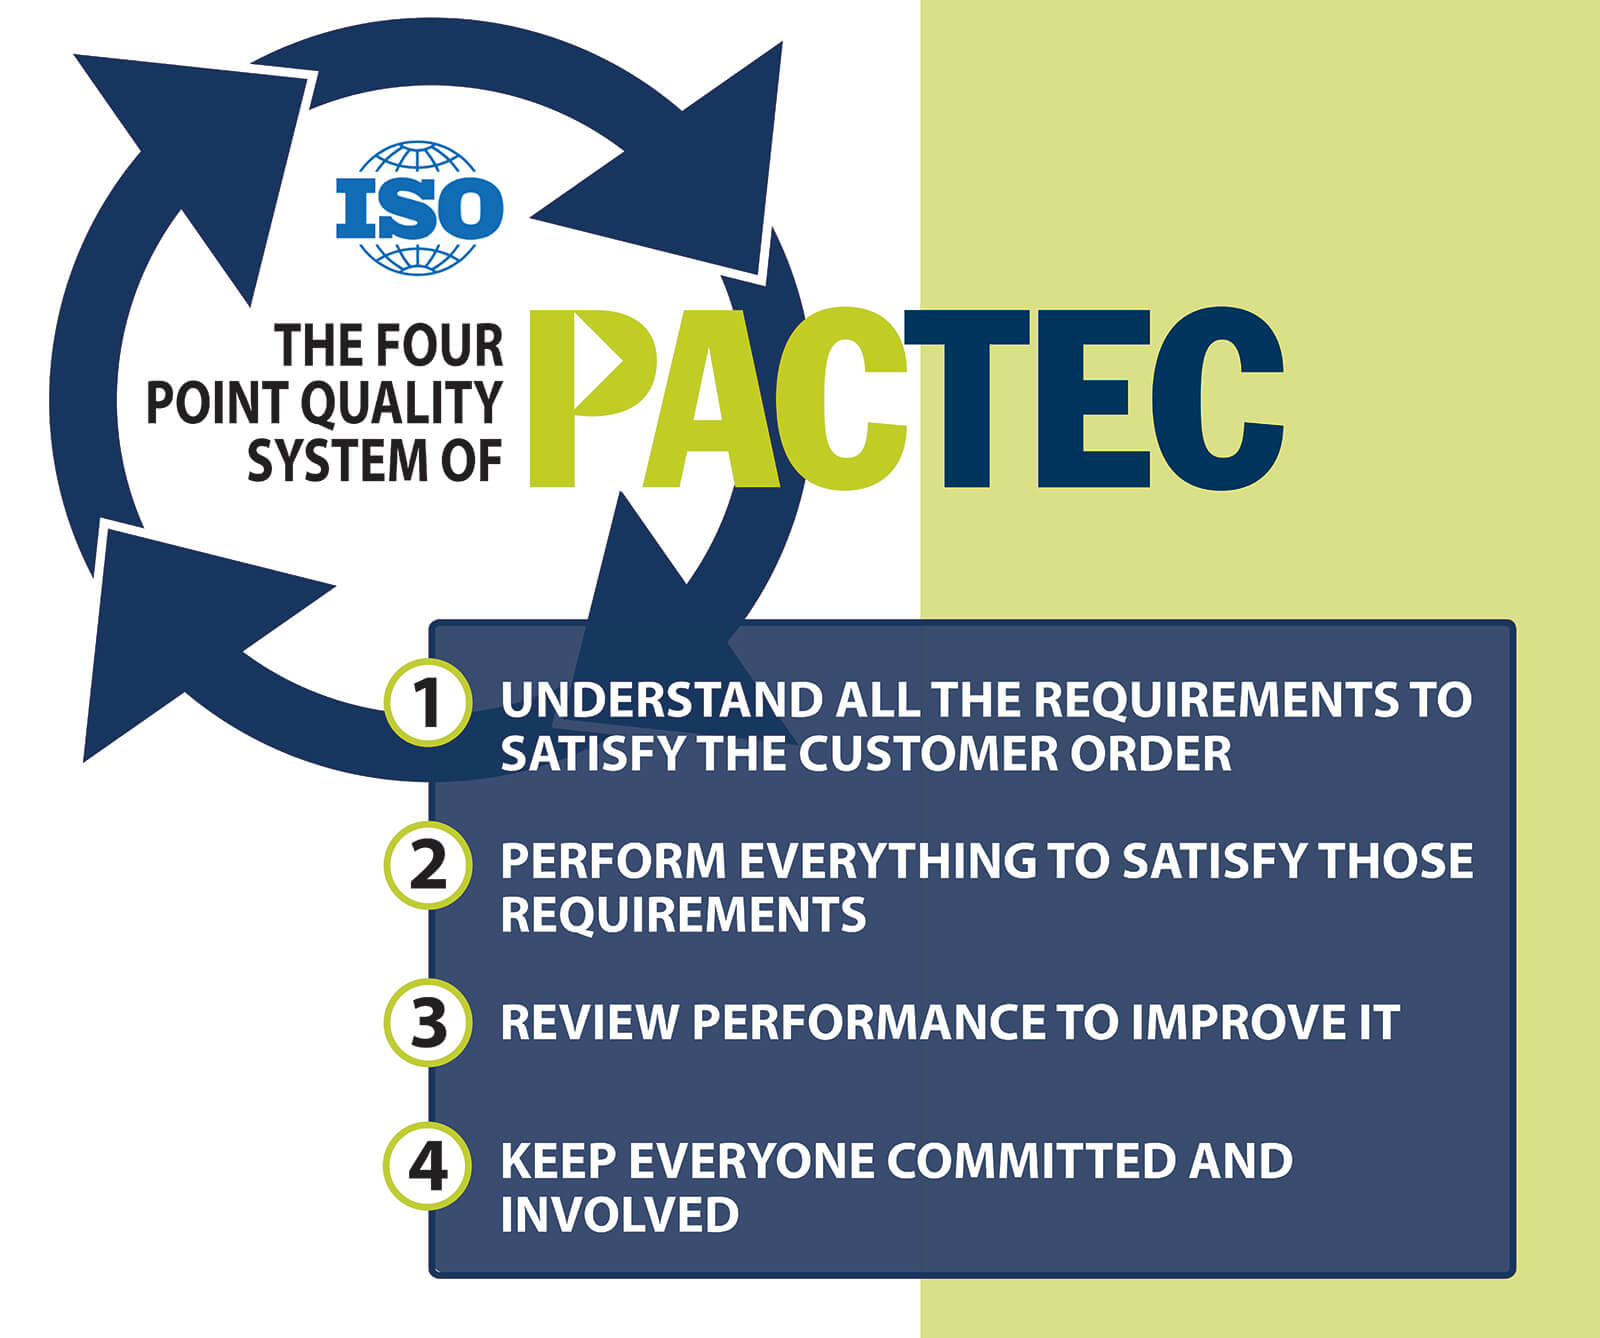 PacTec Inc is an ISO Certified Manufacturer